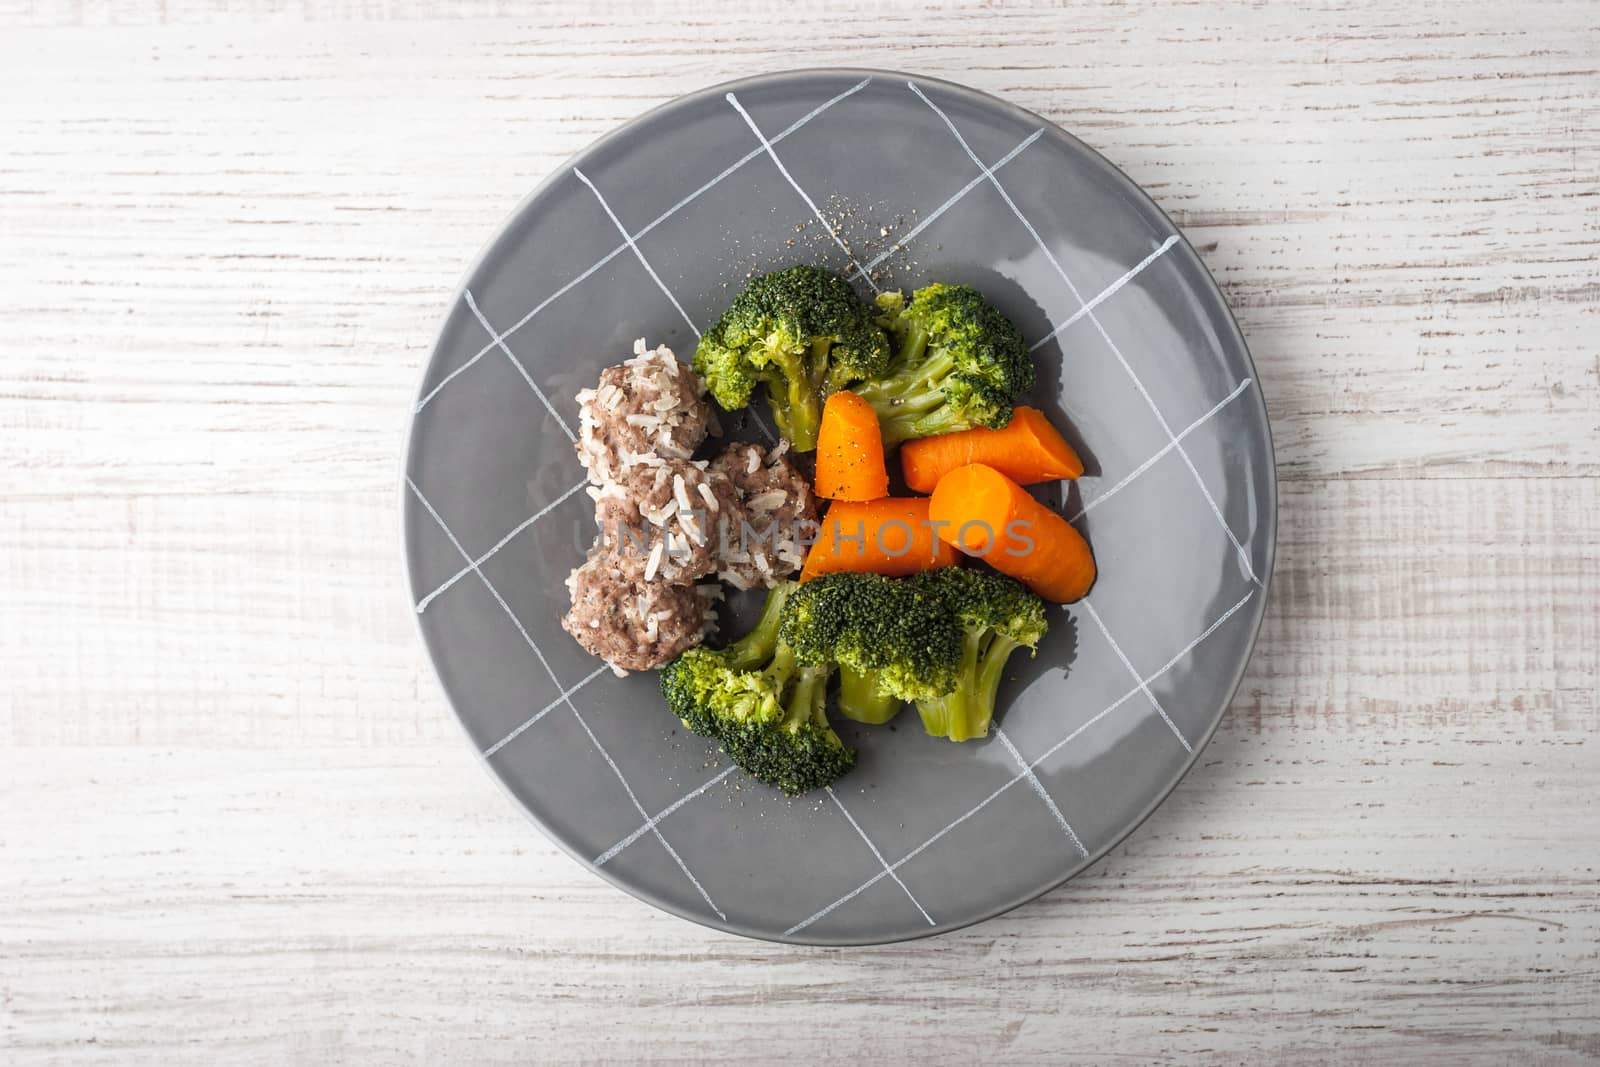 Meatballs with steamed vegetables on the gray plate top view